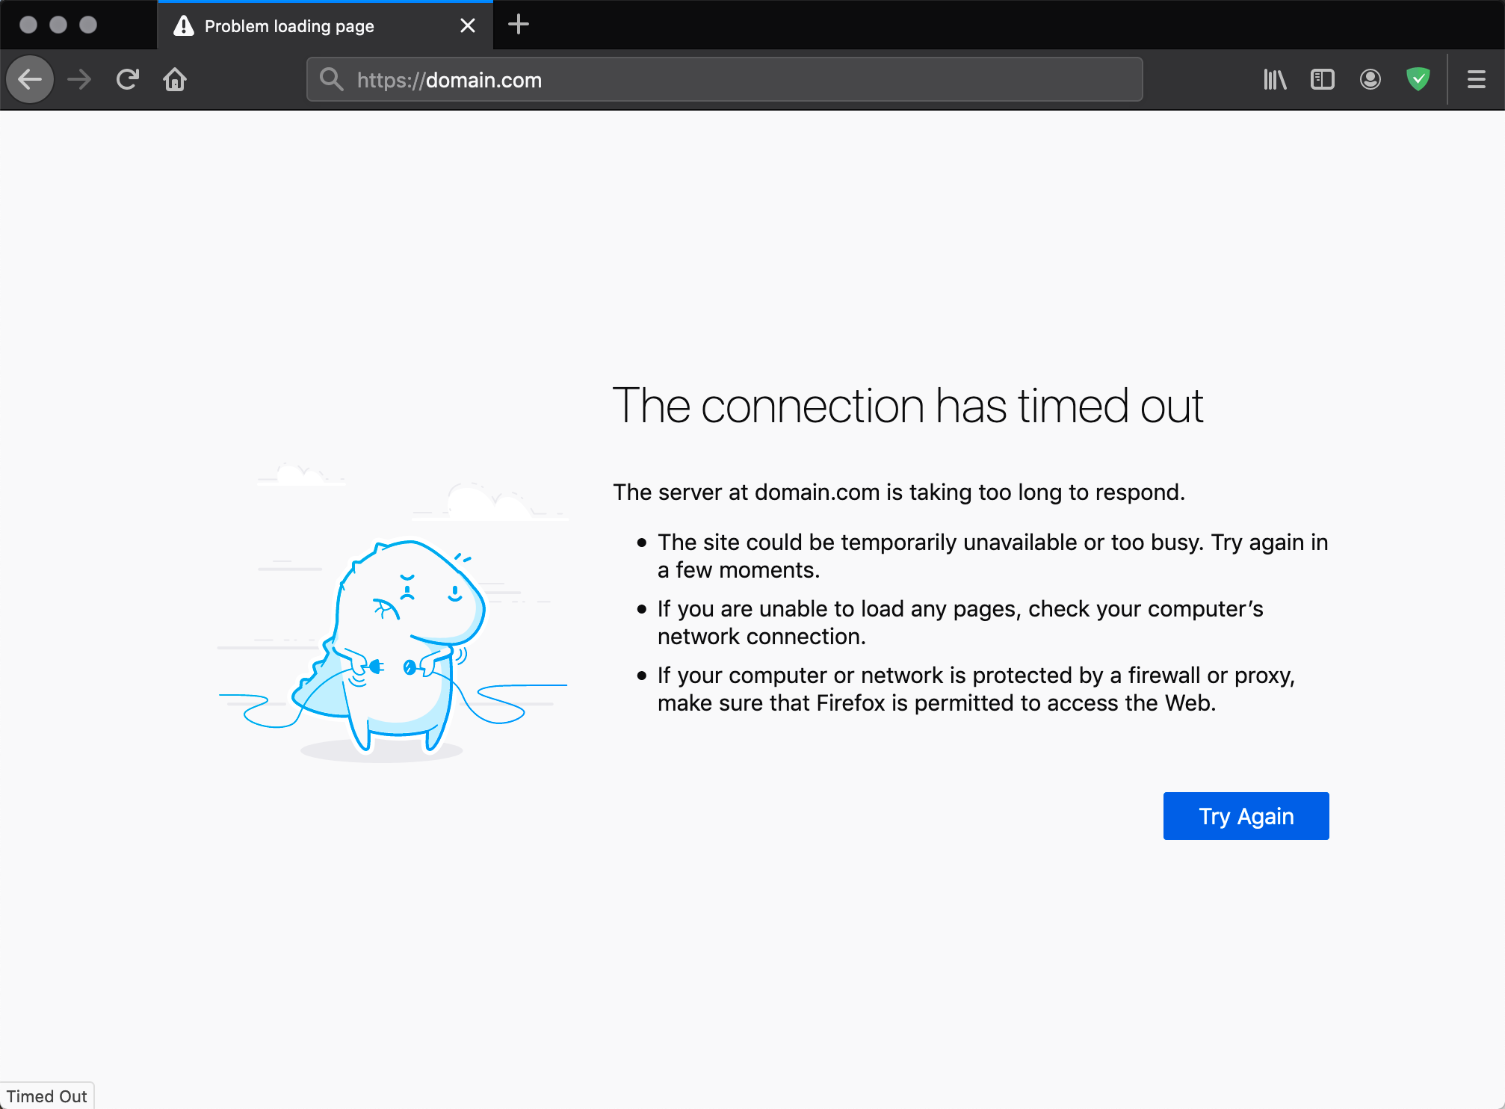 FirefoxでのERR_CONNECTION_TIMED_OUTエラー表示